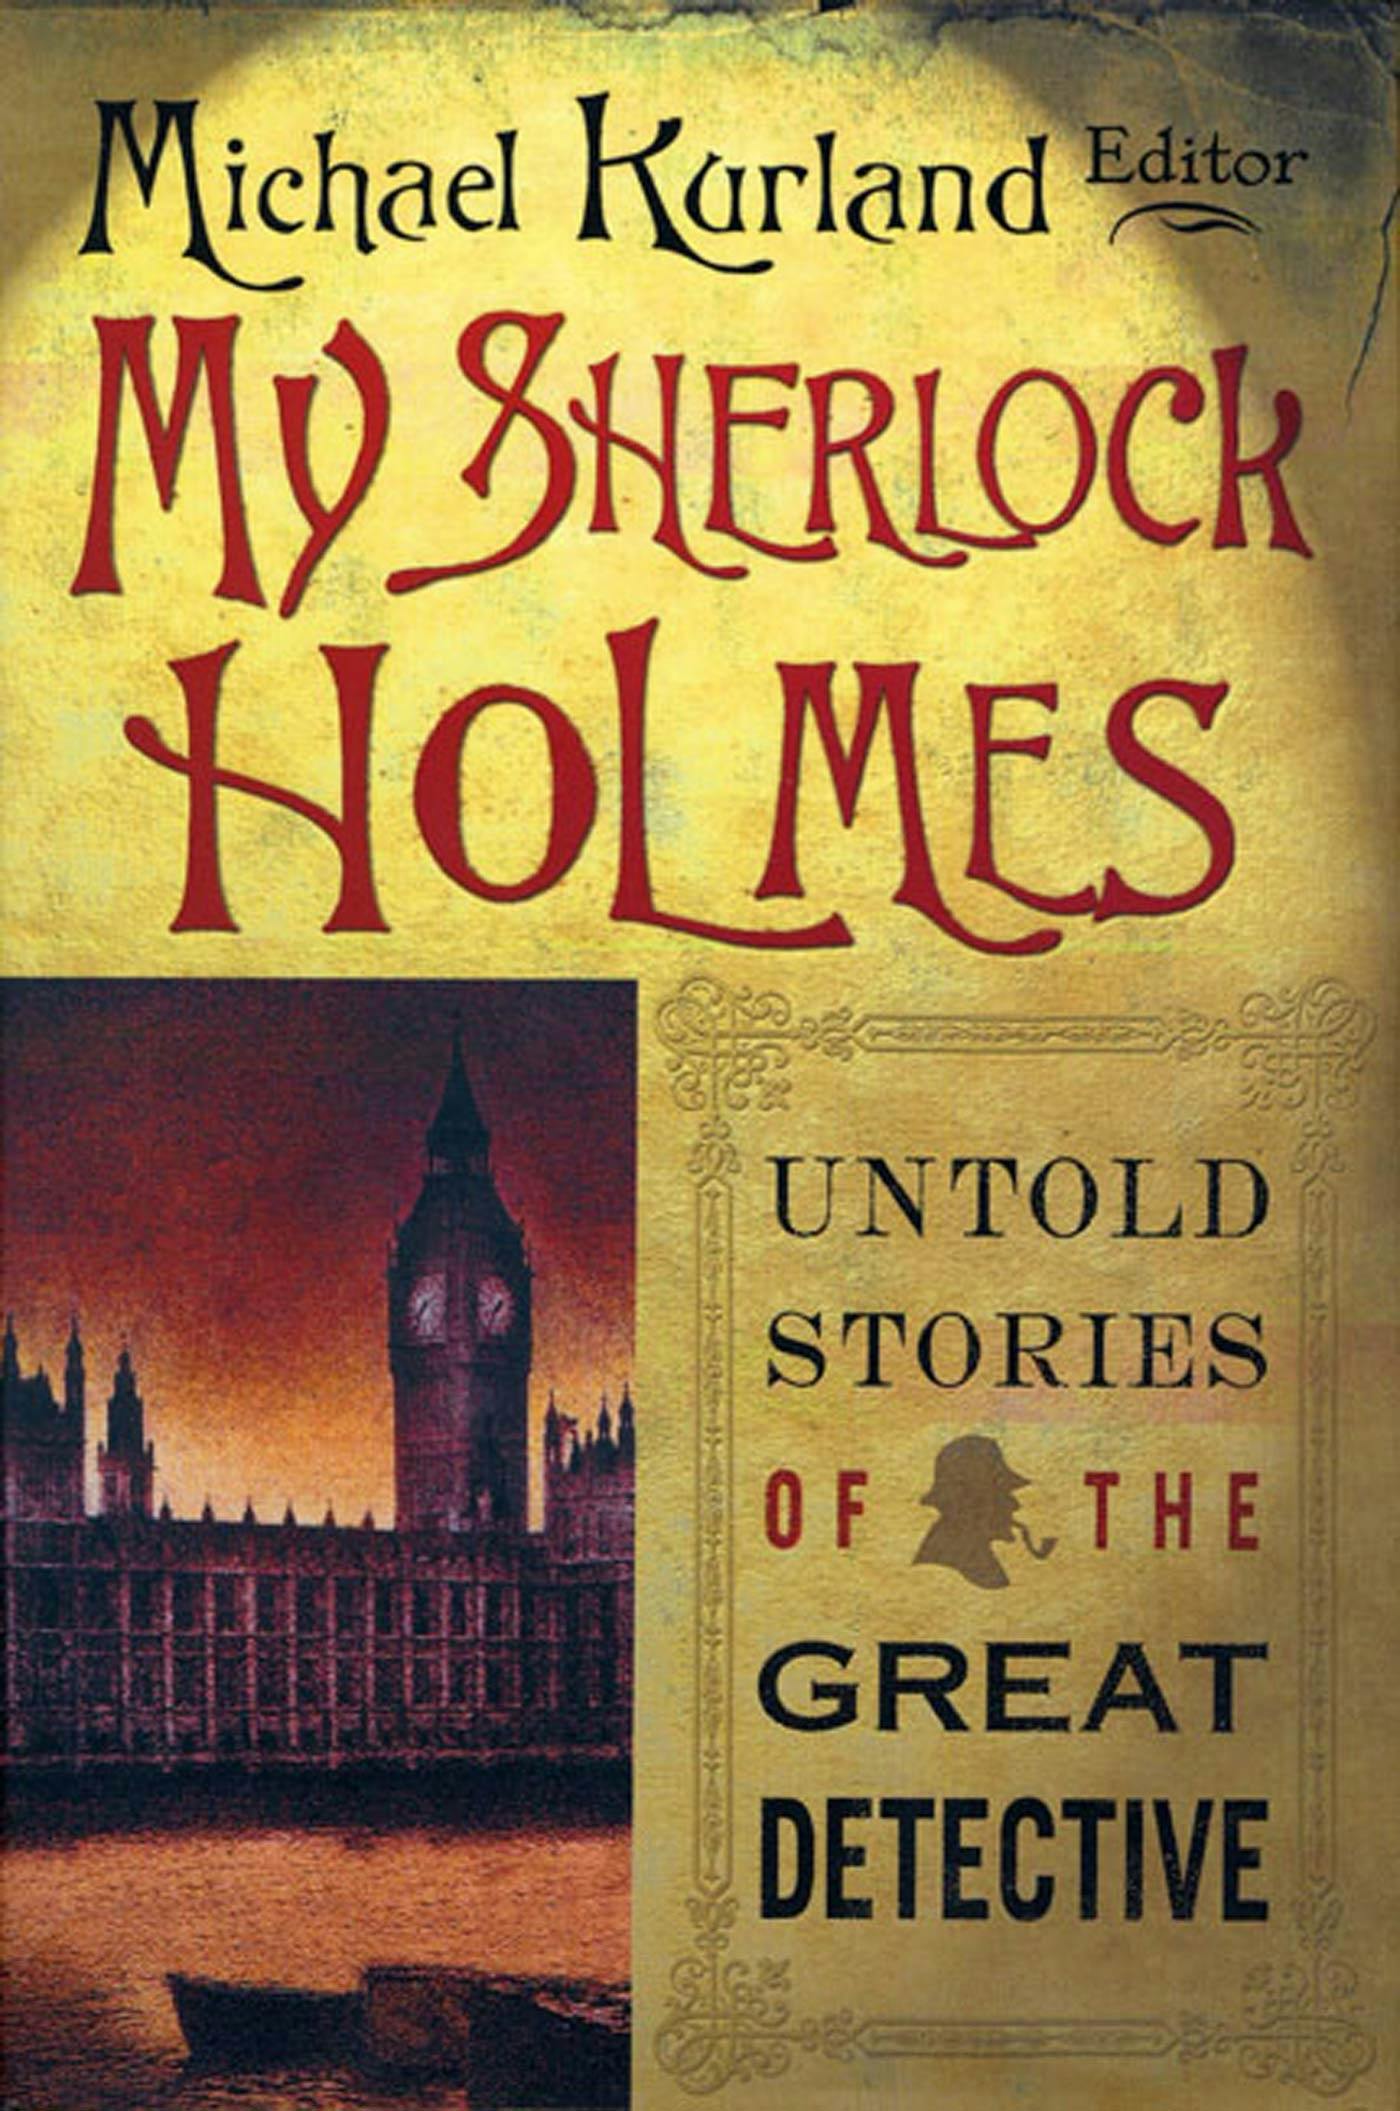 what was the name of the famous novel sherlock holmes